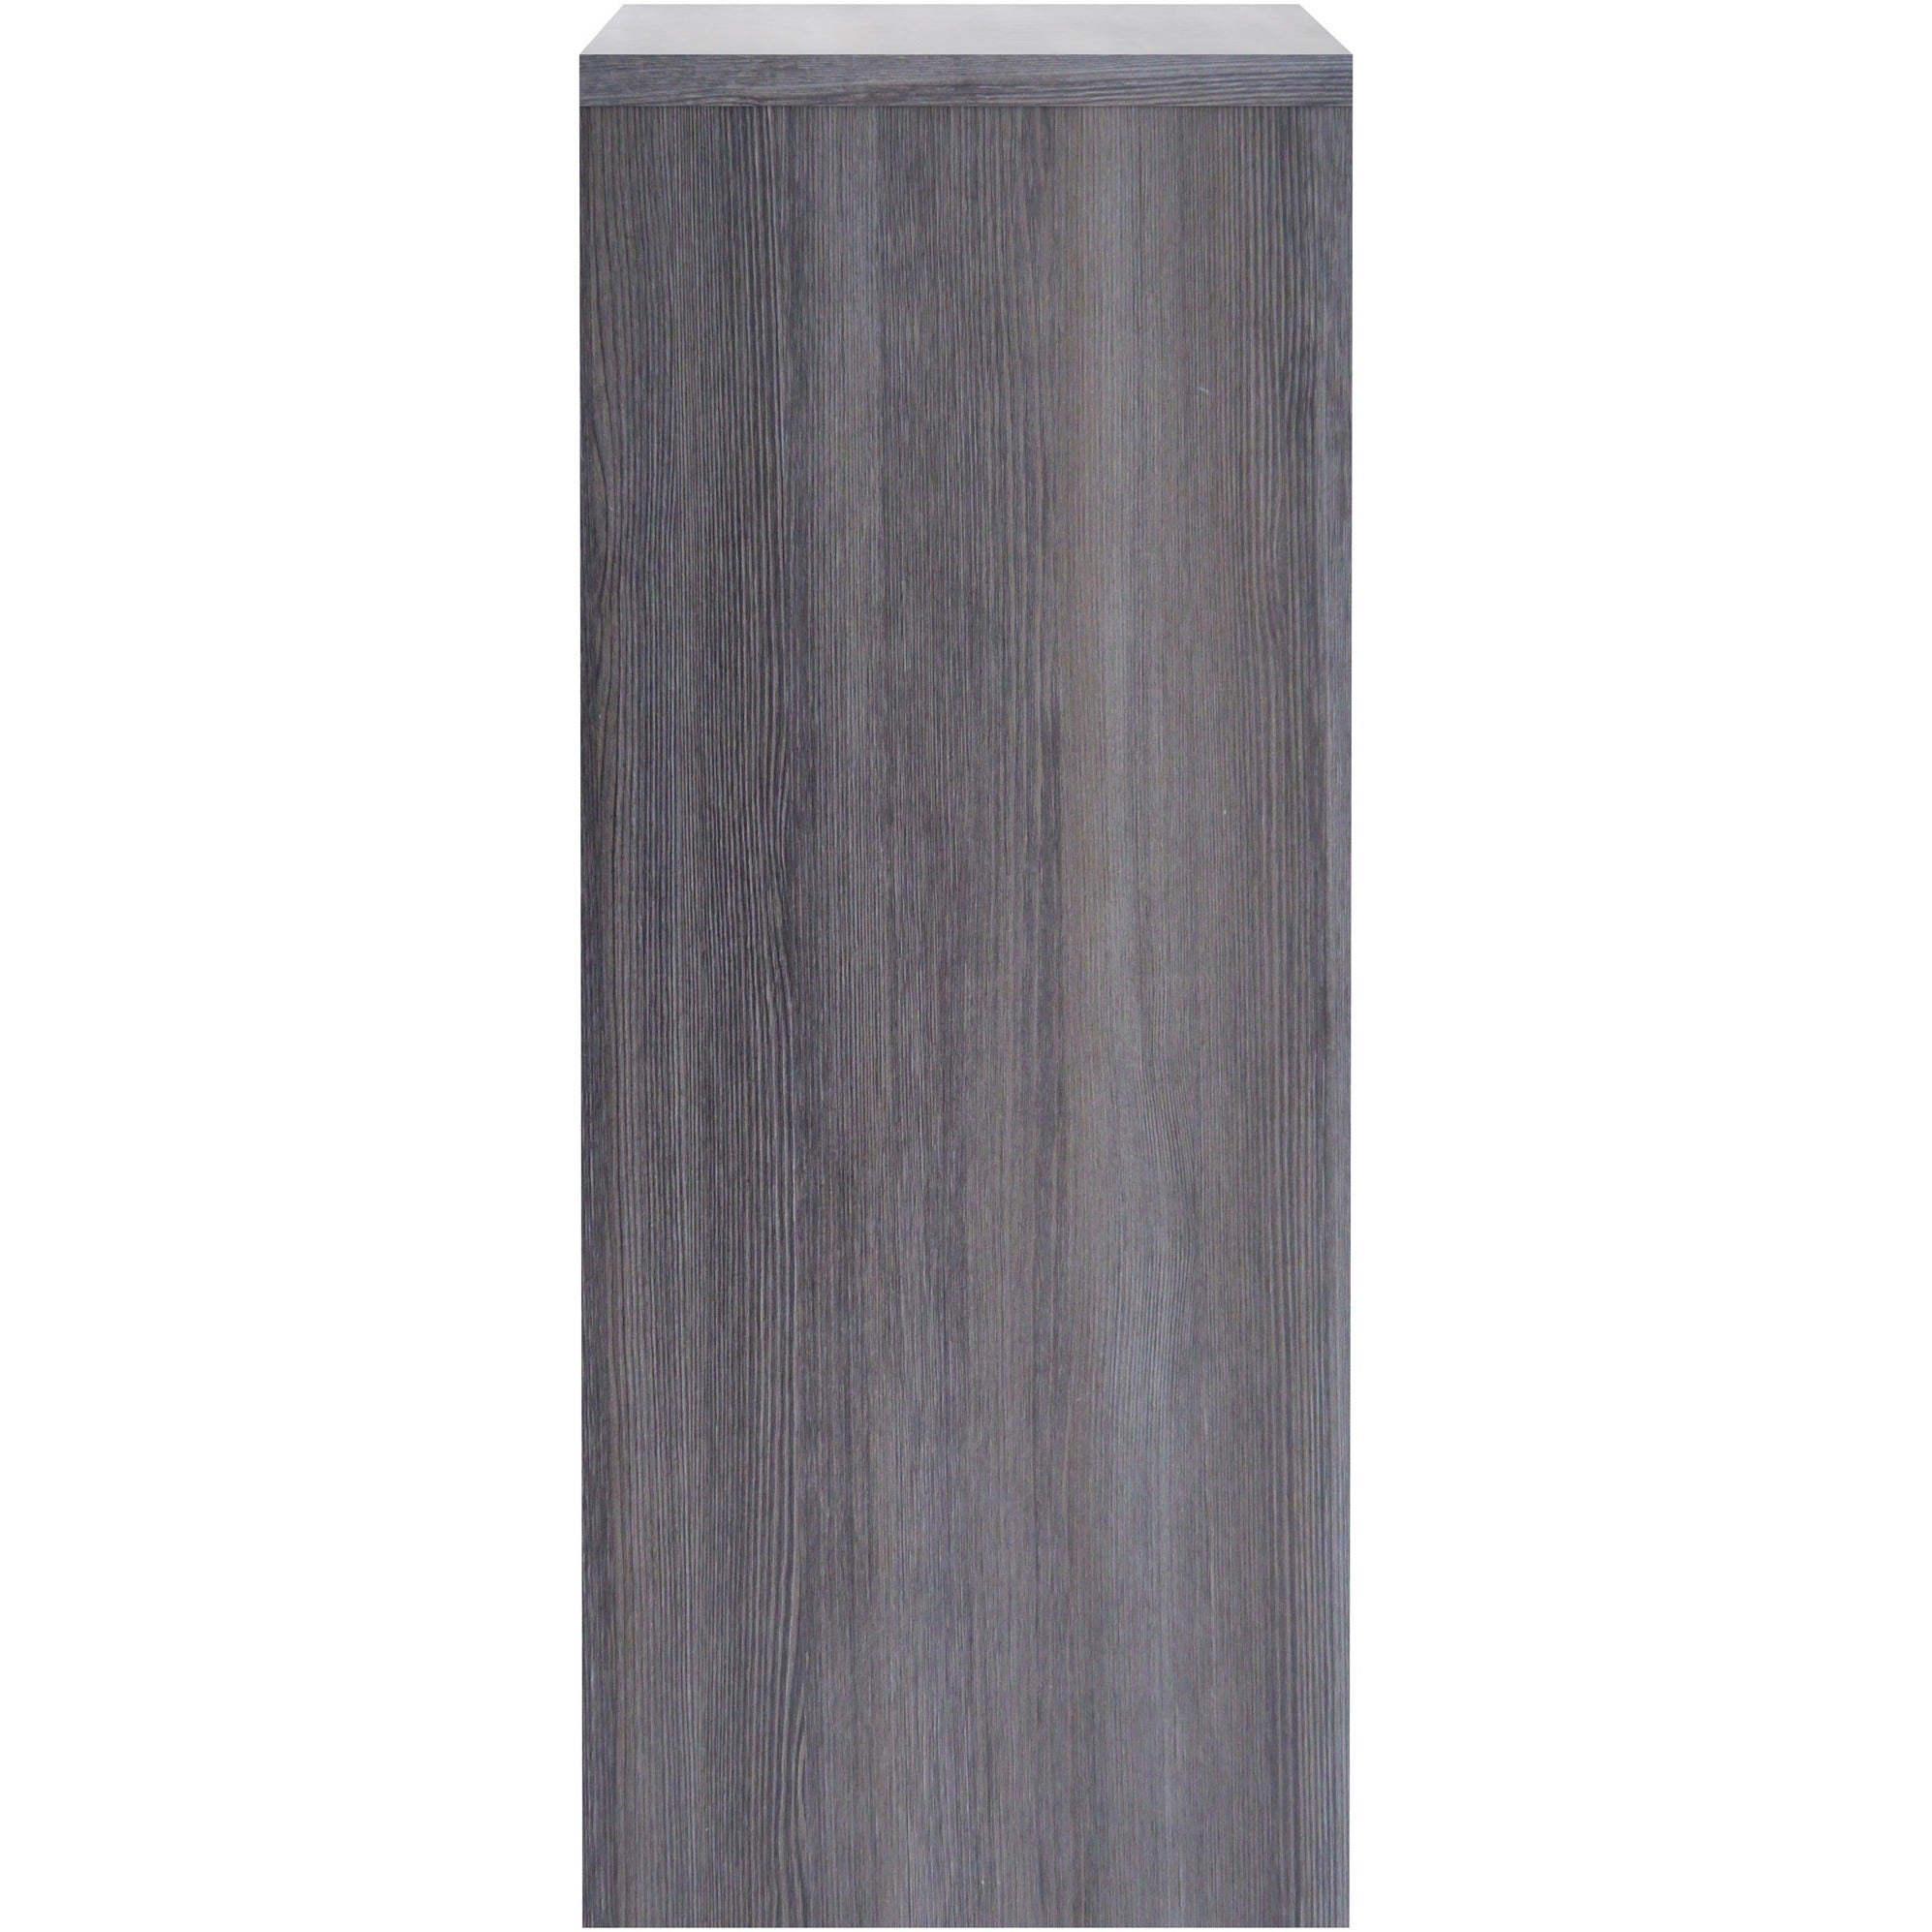 lorell-essentials-series-stack-on-hutch-with-doors-48-x-1536-3-doors-finish-weathered-charcoal-laminate_llr69621 - 4